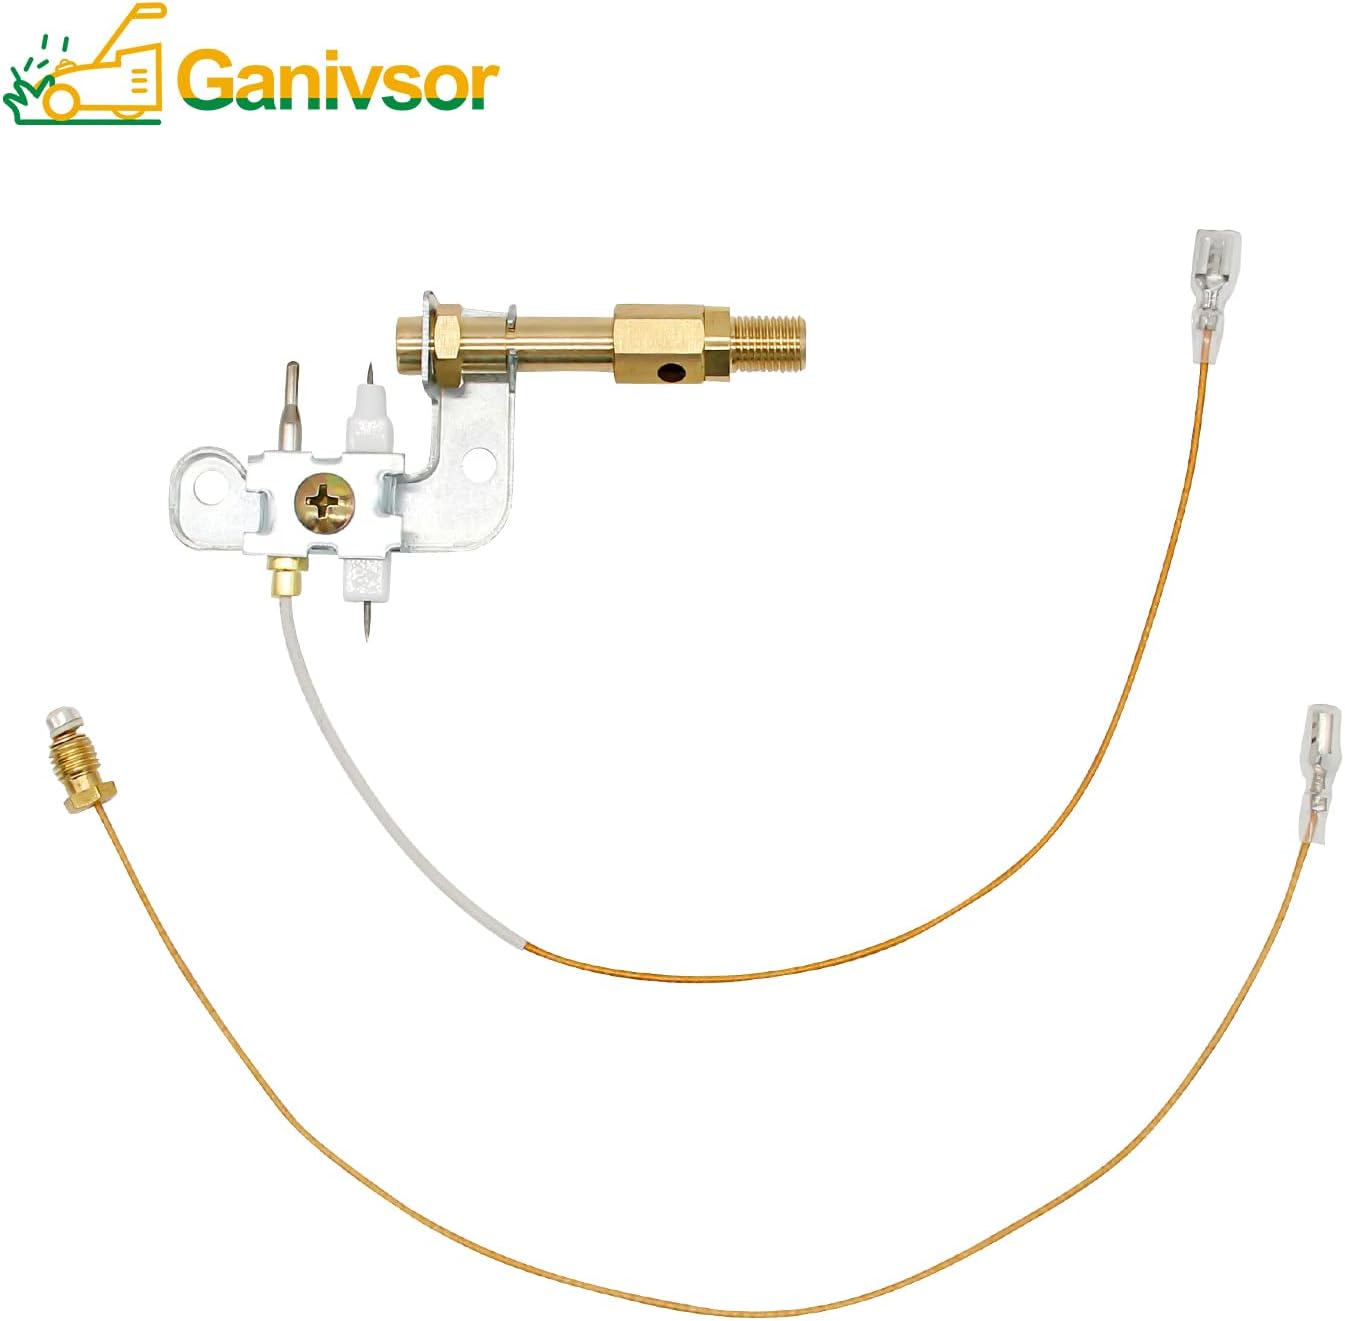 Ganivsor F278527 Pilot Assembly Portable ODS for Mr.Heater Big Buddy MH18B MH9B MH9BX and Dewalt Small Propane Heater Parts - 78422 Space Heater Pilot - Ganivsor F278527 Pilot Assembly Portable ODS Review